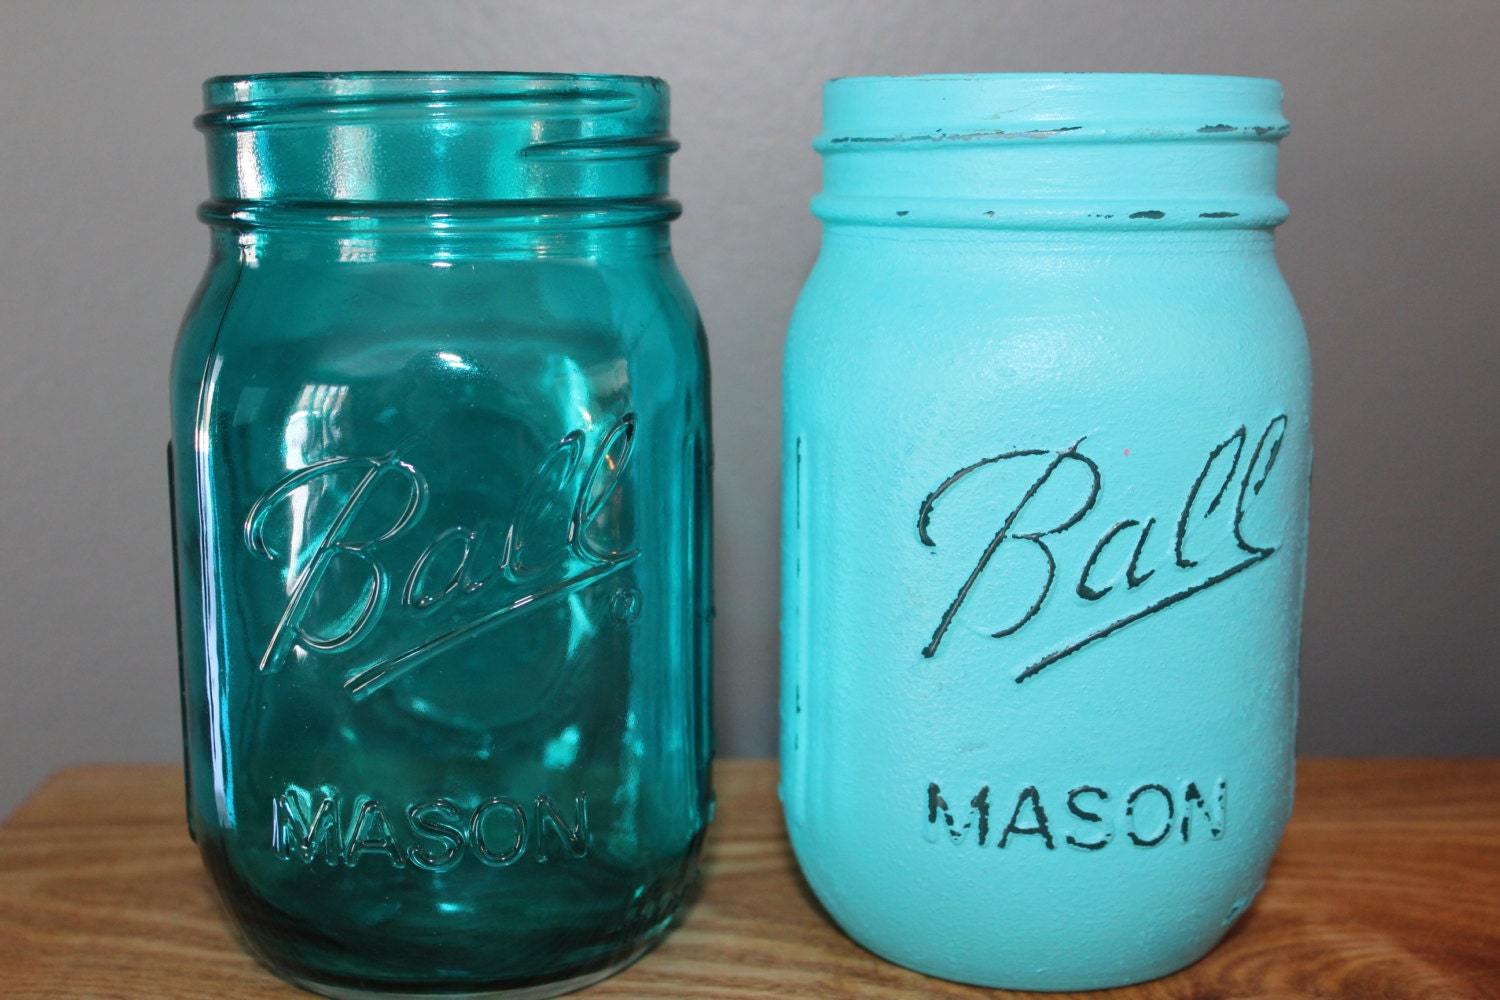 2 Blue Colored Ball Mason Jars One Blue Hand By Coloring Wallpapers Download Free Images Wallpaper [coloring654.blogspot.com]